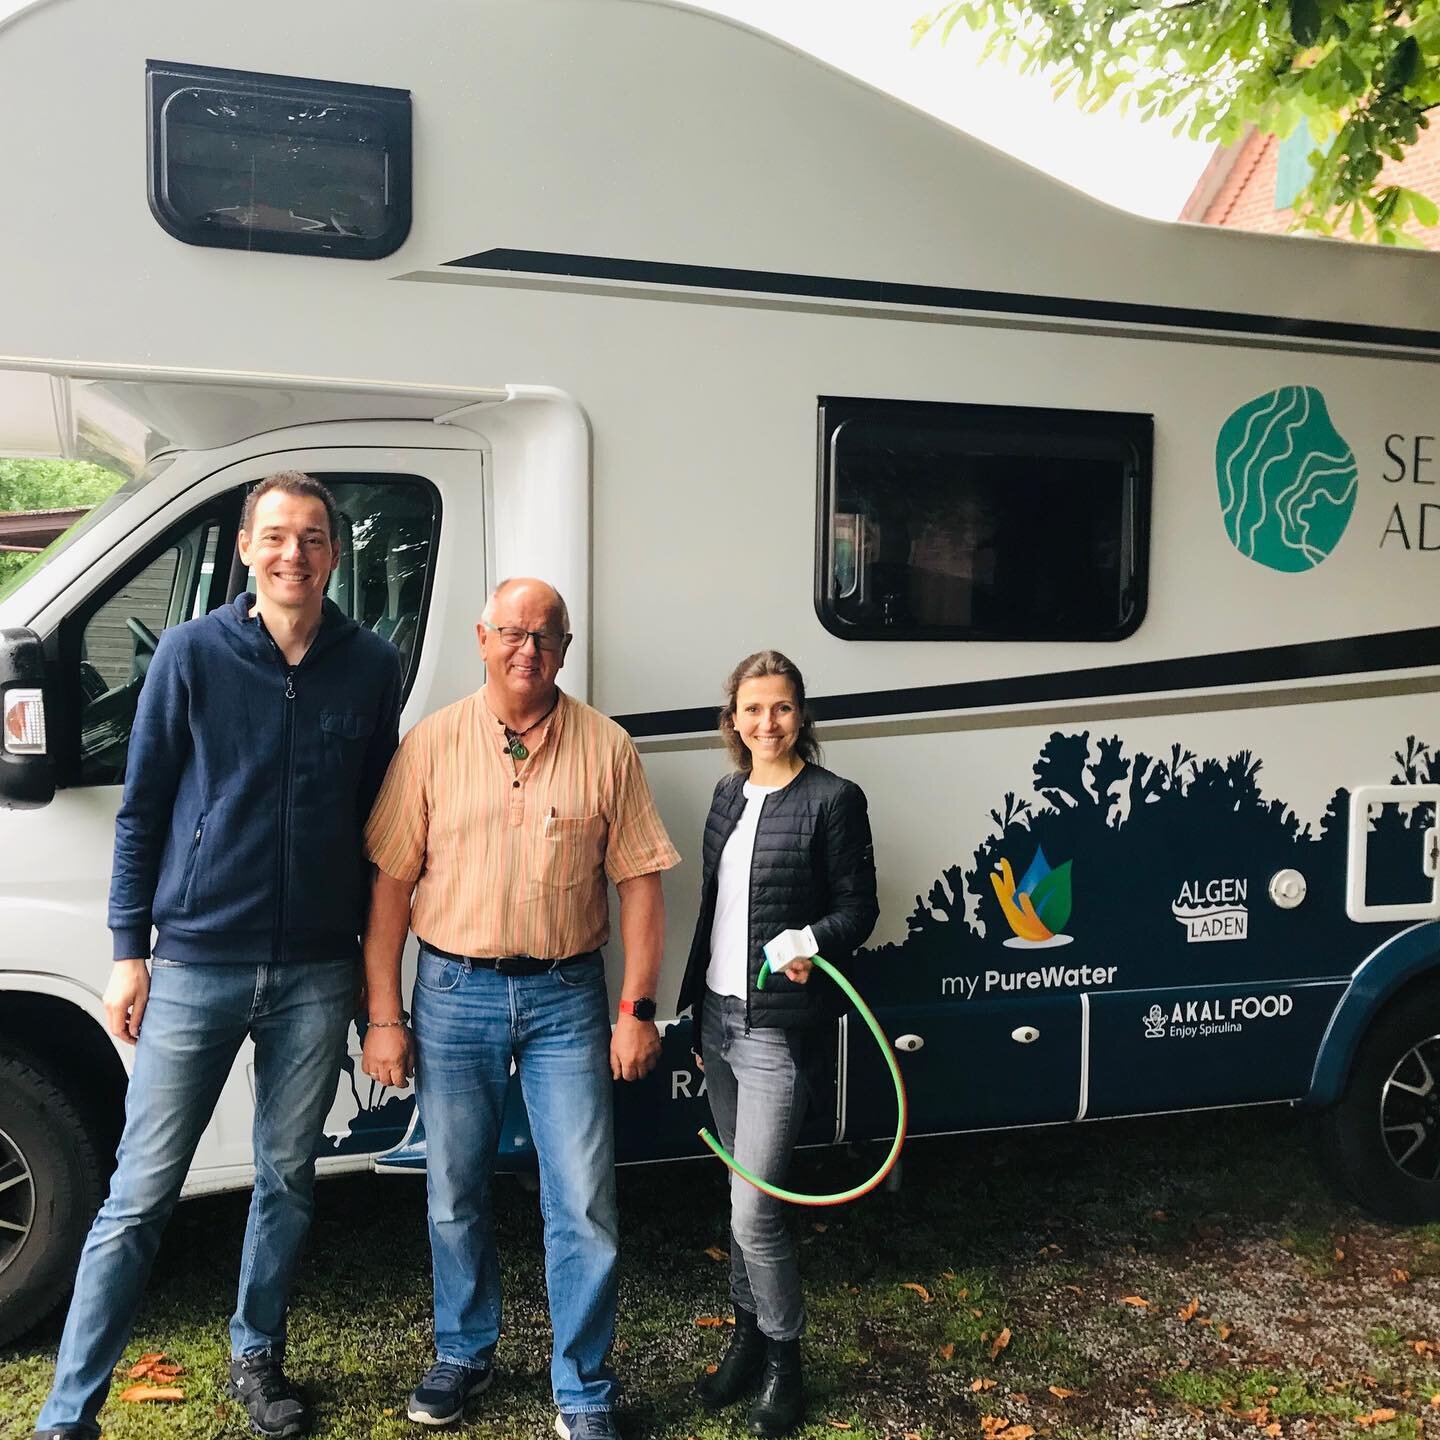 Are you looking for the solution to have spring quality water while traveling? We found the perfect fit 🤩🤩🤩. This was the first stop of the seaweed adventure van and we met with our partner my PureWater @mypurewater and officially picked up our Wh